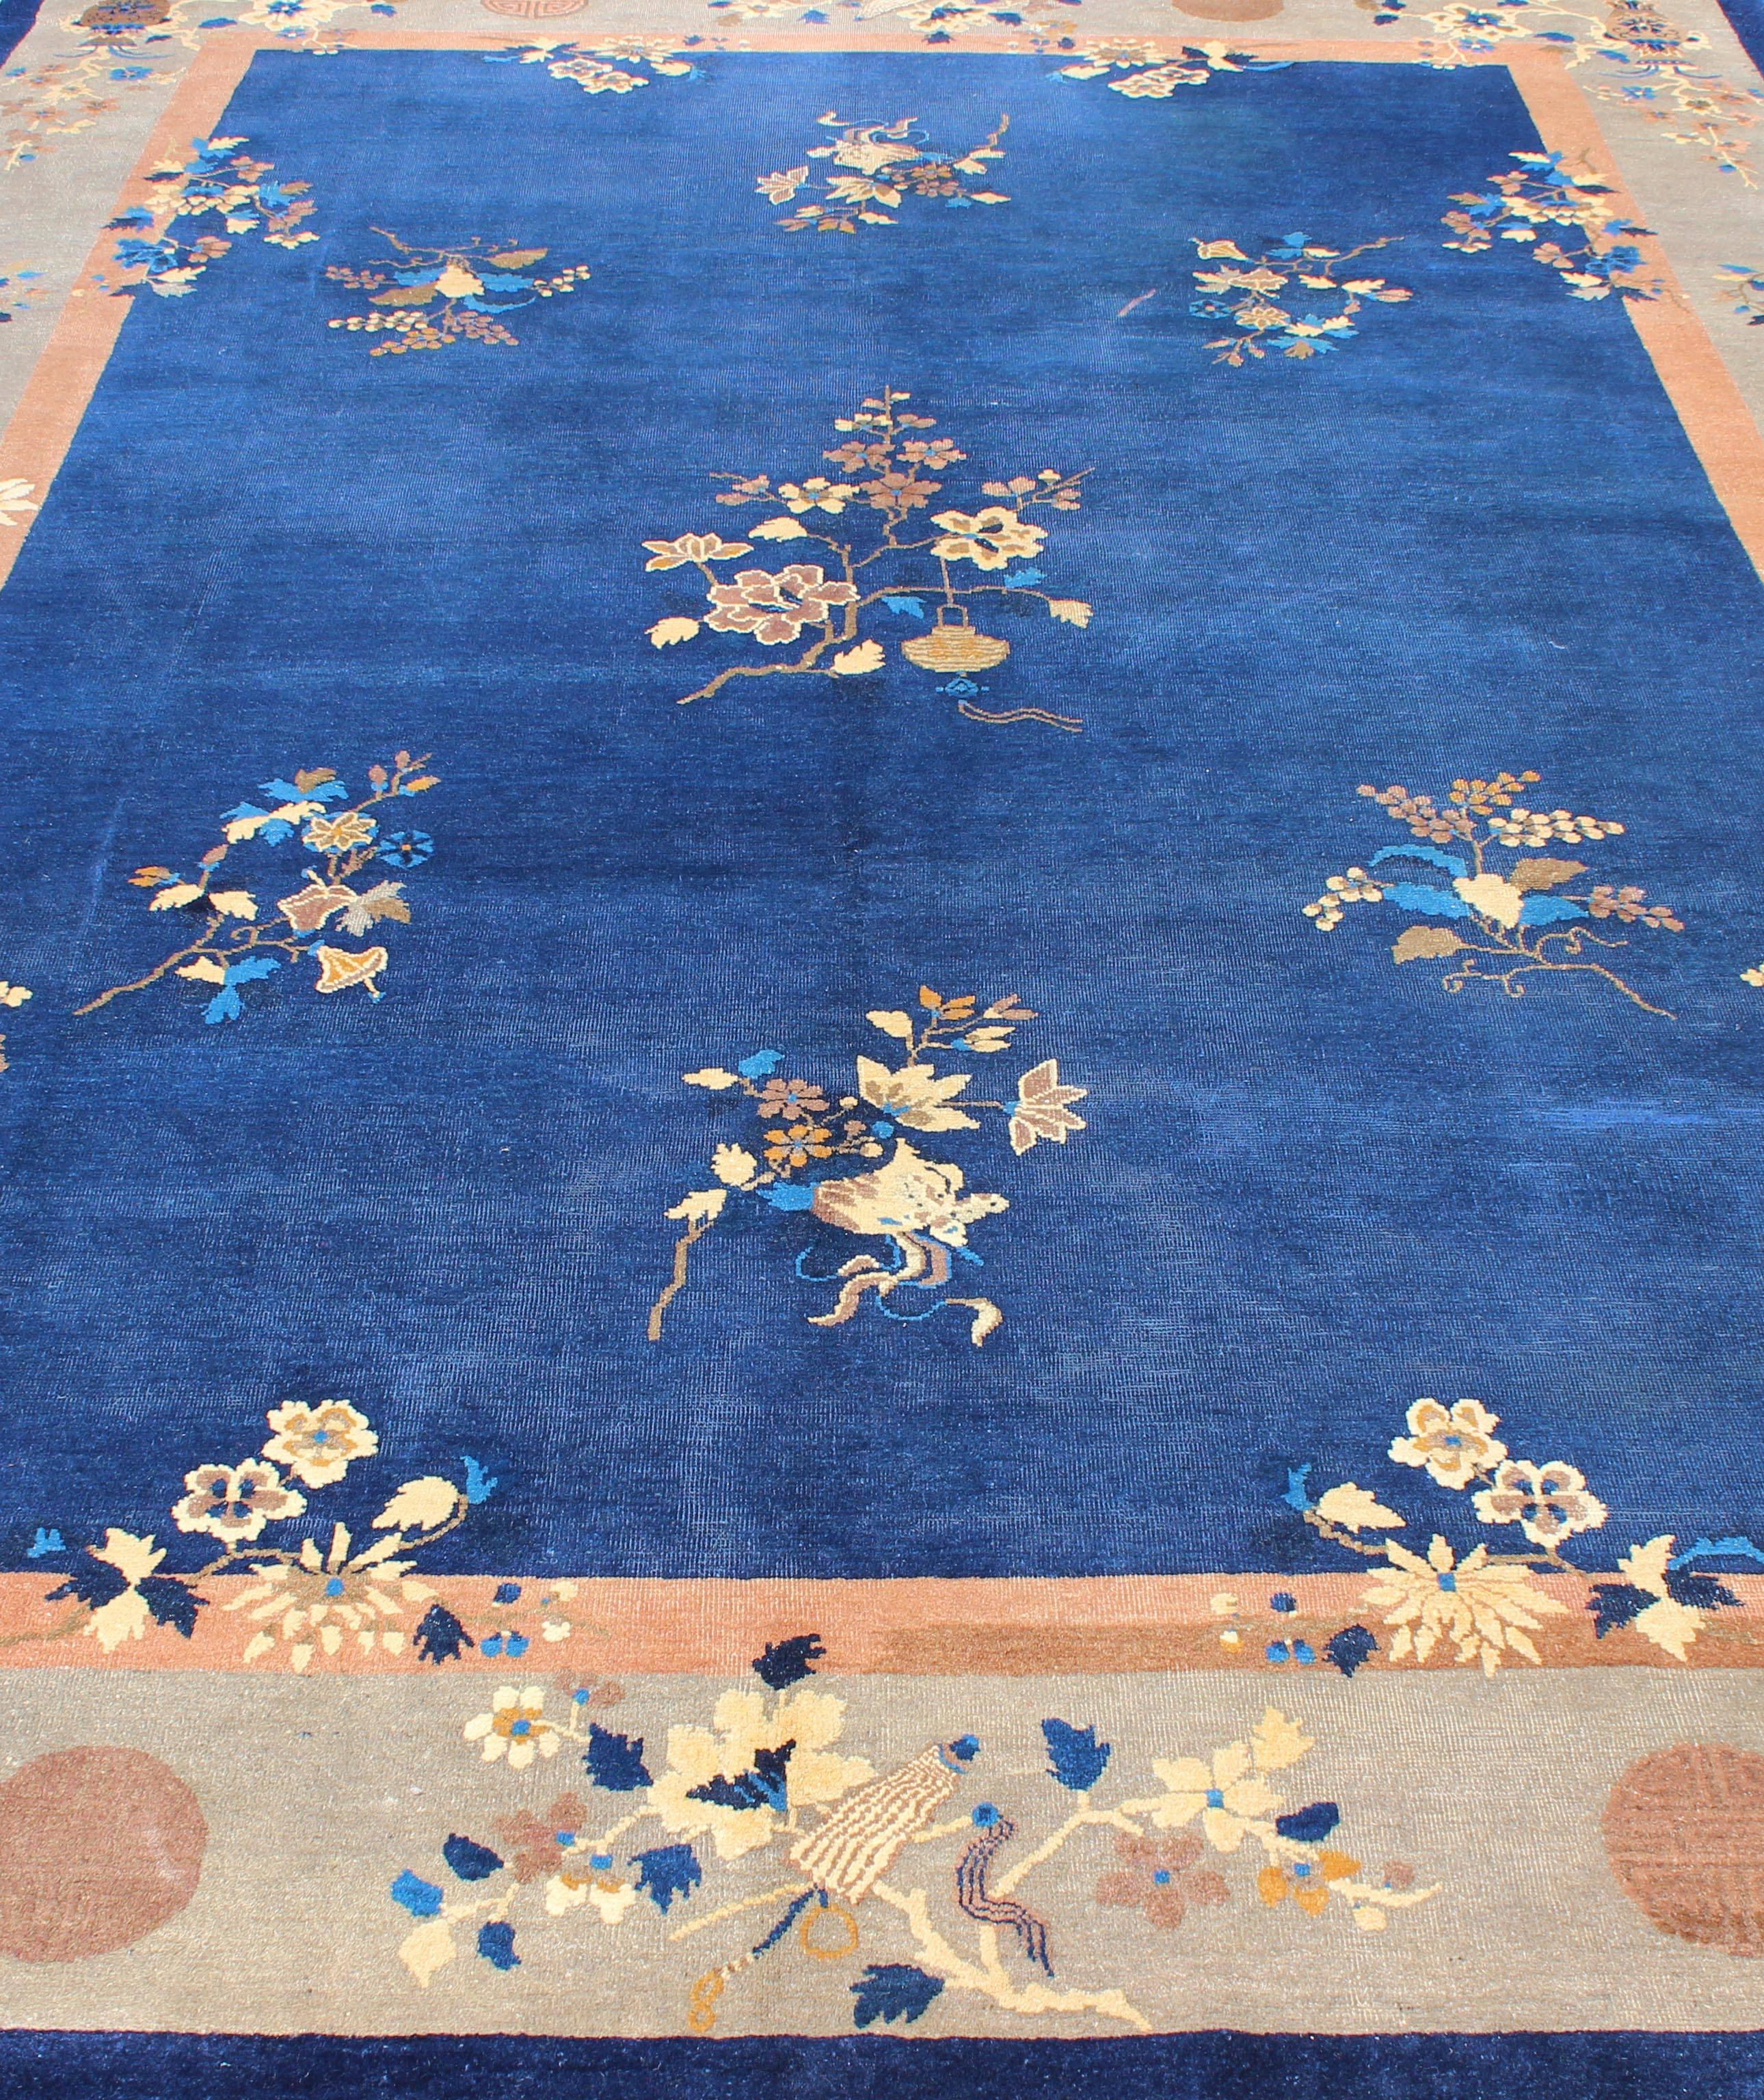 Early 20th Century Large Antique Chinese Pecking Rug with Flowers and Vases in Navy Blue and Tan For Sale